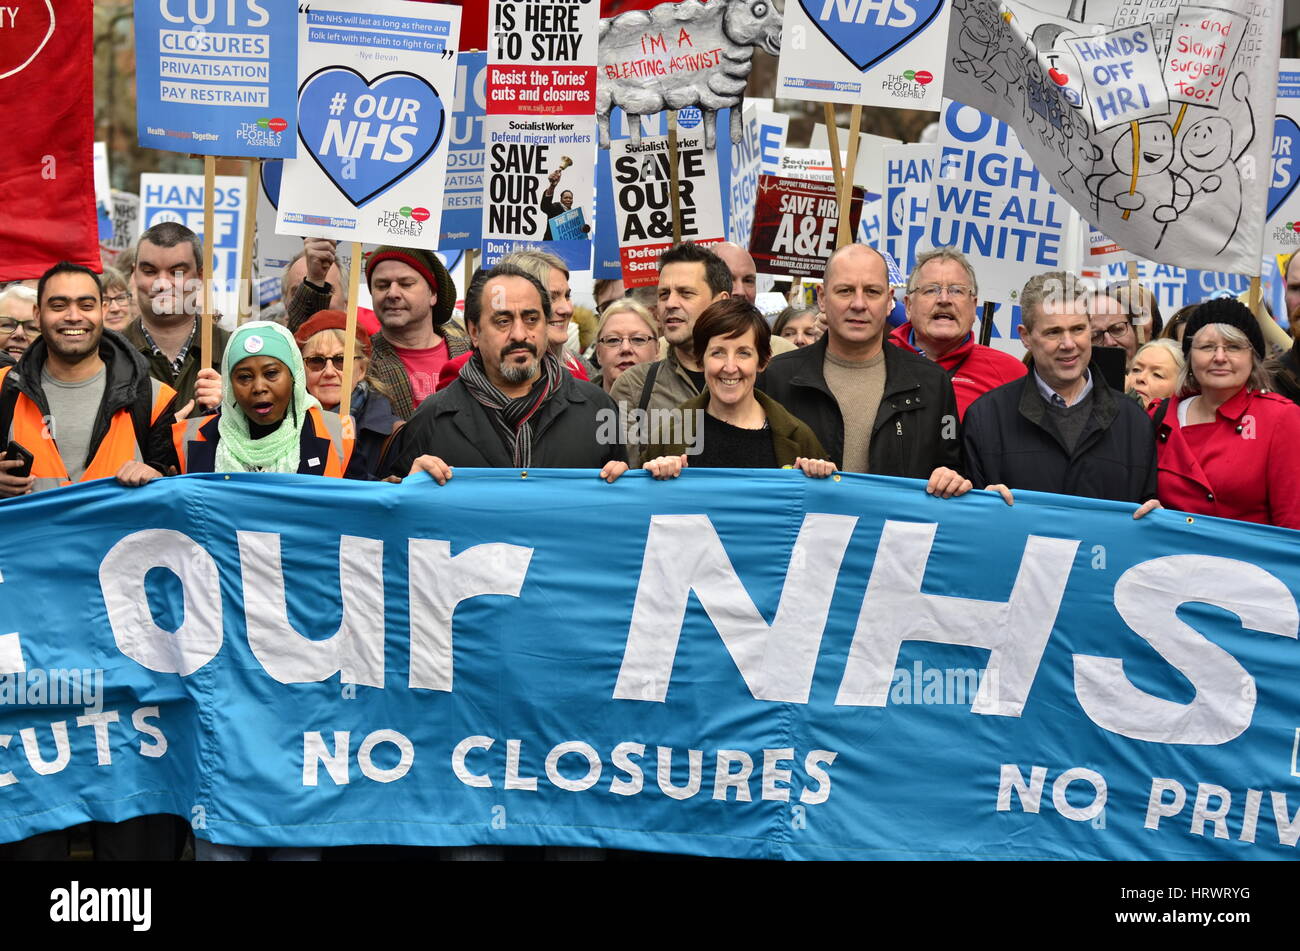 London 4th March. Julie Hesmondhalgh (centre) at the Our NHS march, organised by The People's Assembly, marches from Tavistock Square to Parliament Square, to campaign against cuts and privatisation in the National Health Service Credit: PjrNews Stock Photo